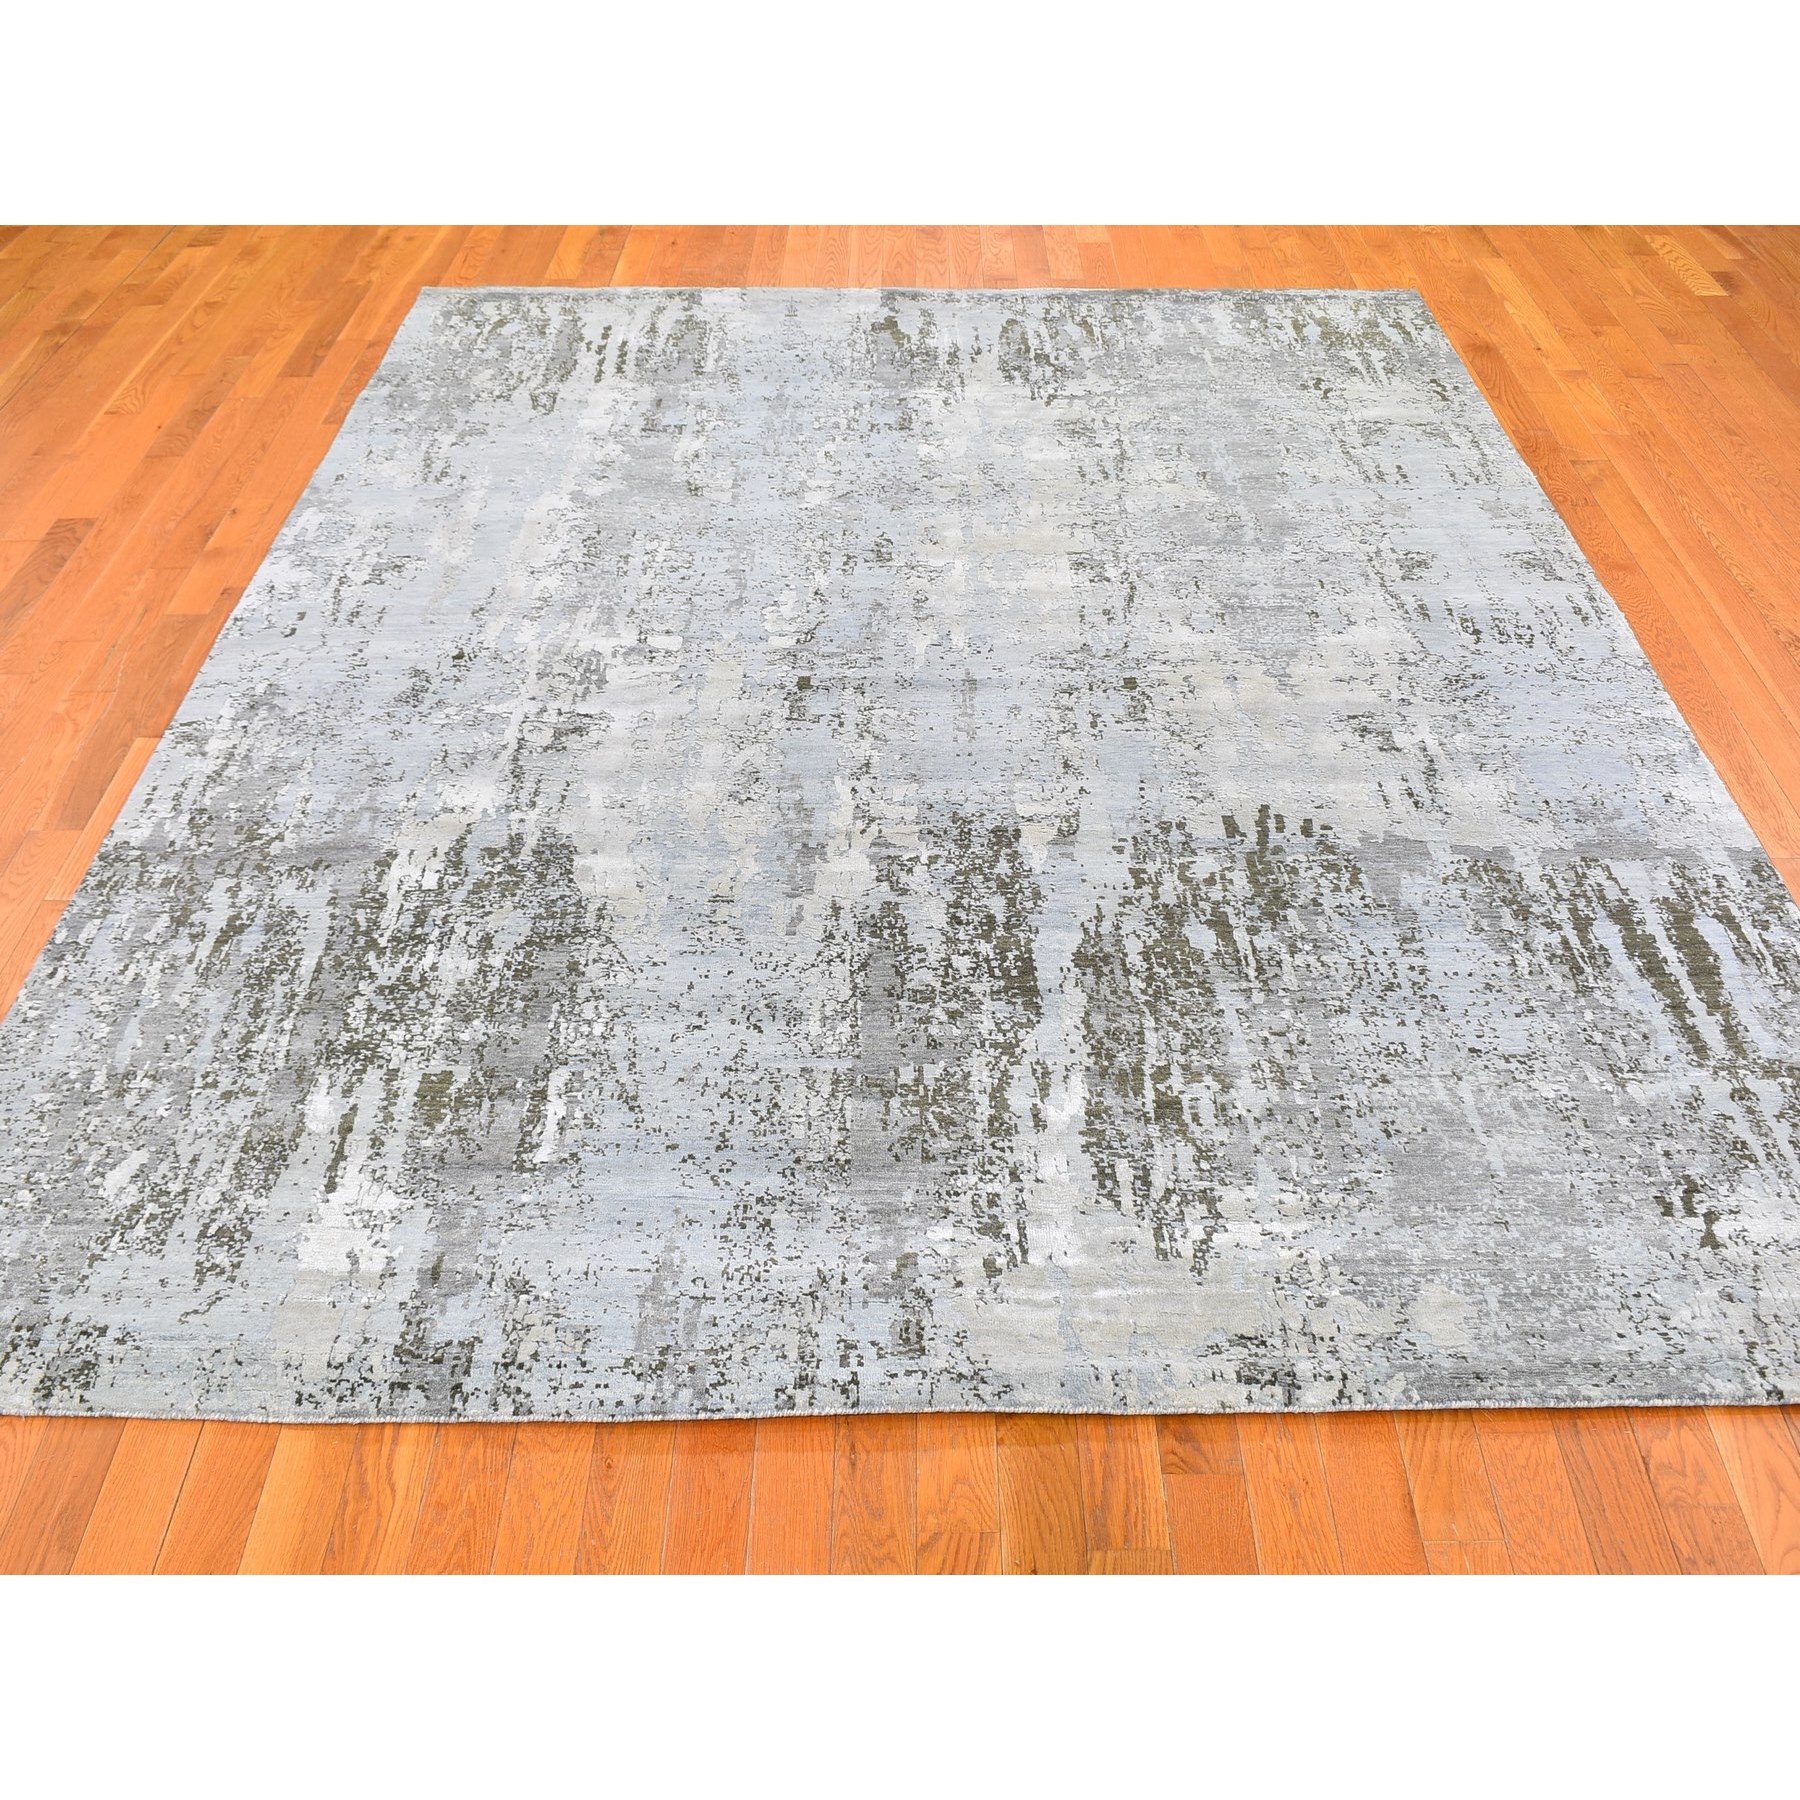 8'x10'2" Ivory Wool with Real Silk Abstract Design Denser Weave Hi-Low Pile Hand Woven Oriental Rug 